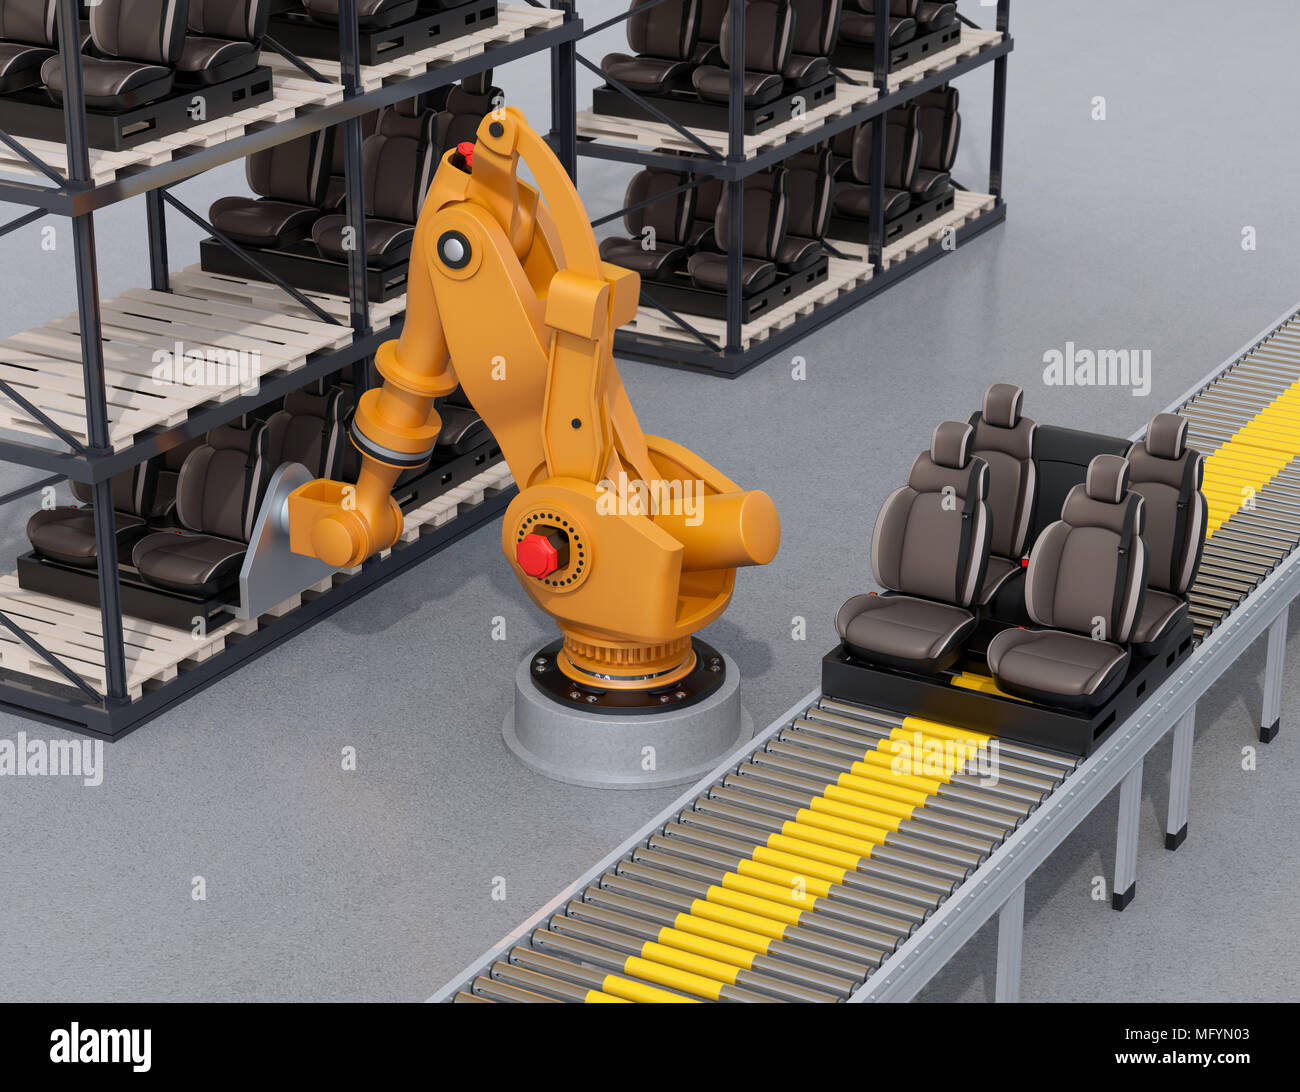 Heavyweight robotic arm carrying car seats in car assembly production line. 3D rendering image. Stock Photo